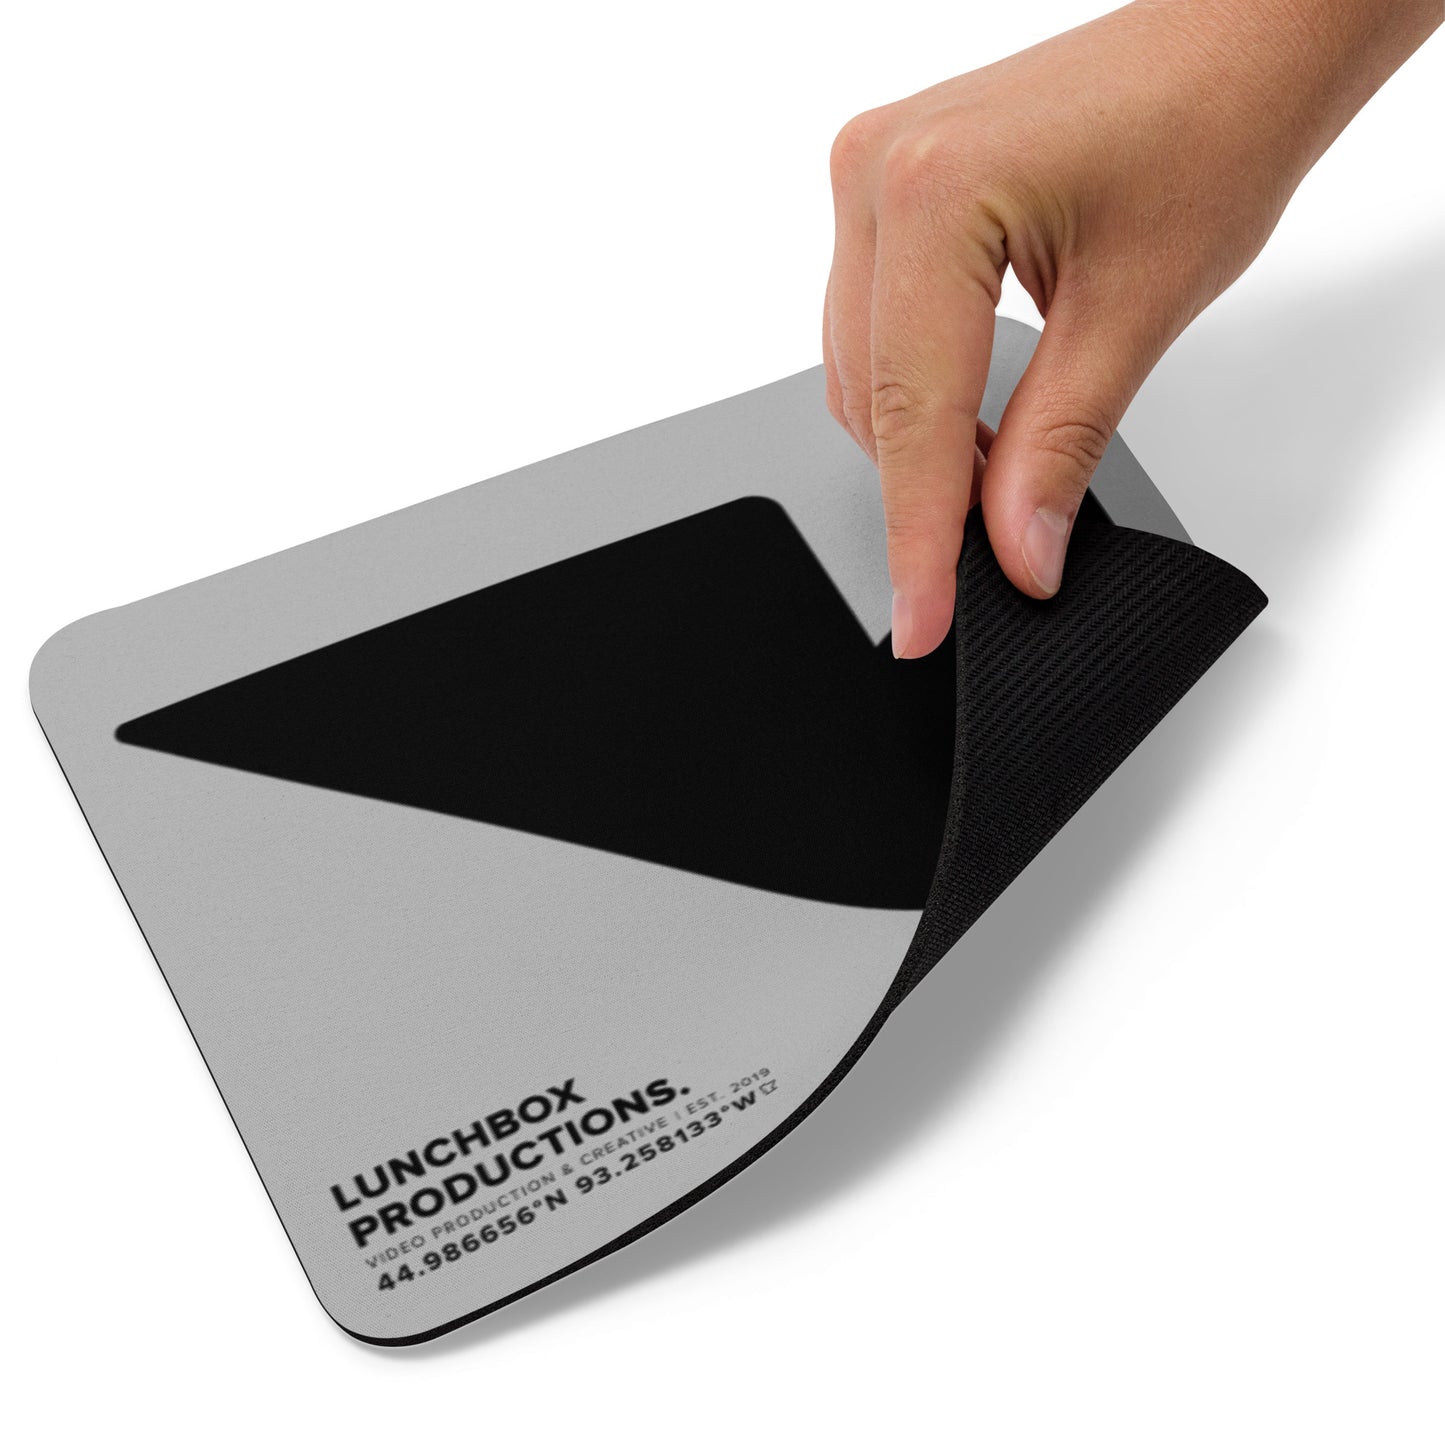 LunchBox Mouse Pad